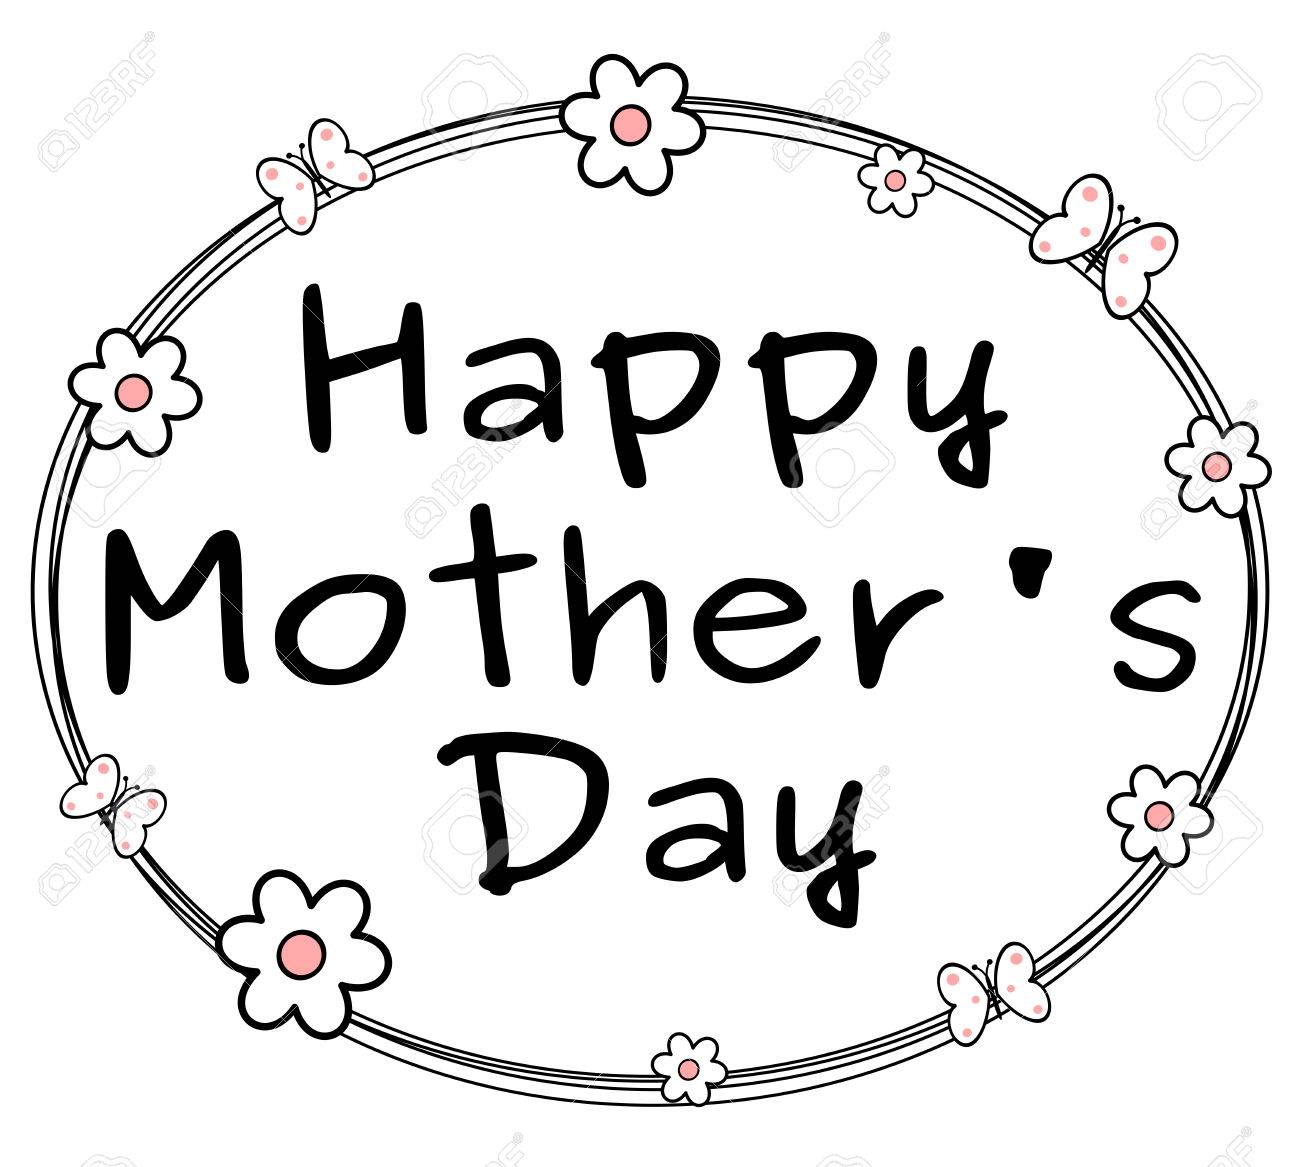 happy-mothers-day-clipart-black-and-white-design-corral